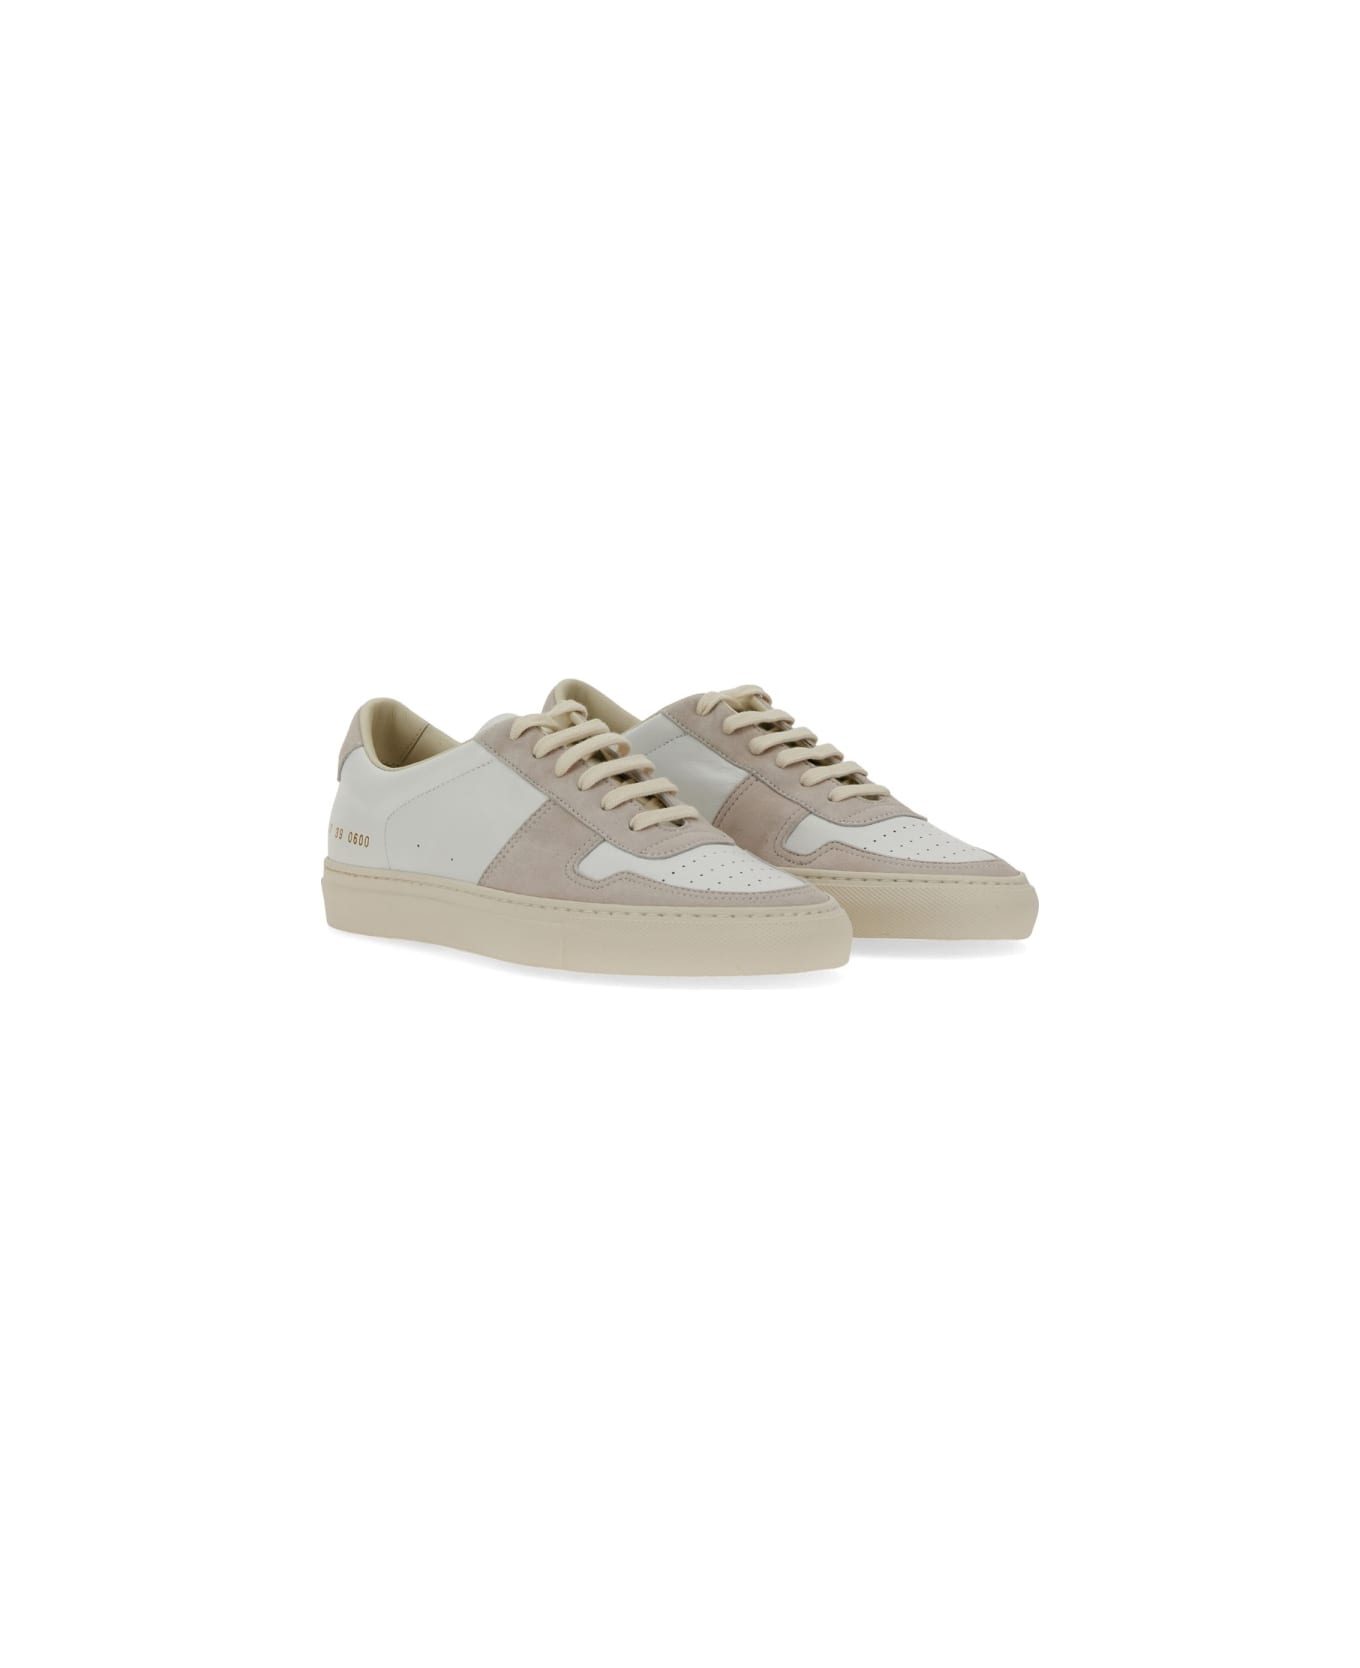 Common Projects 'bball' Sneaker - NUDE